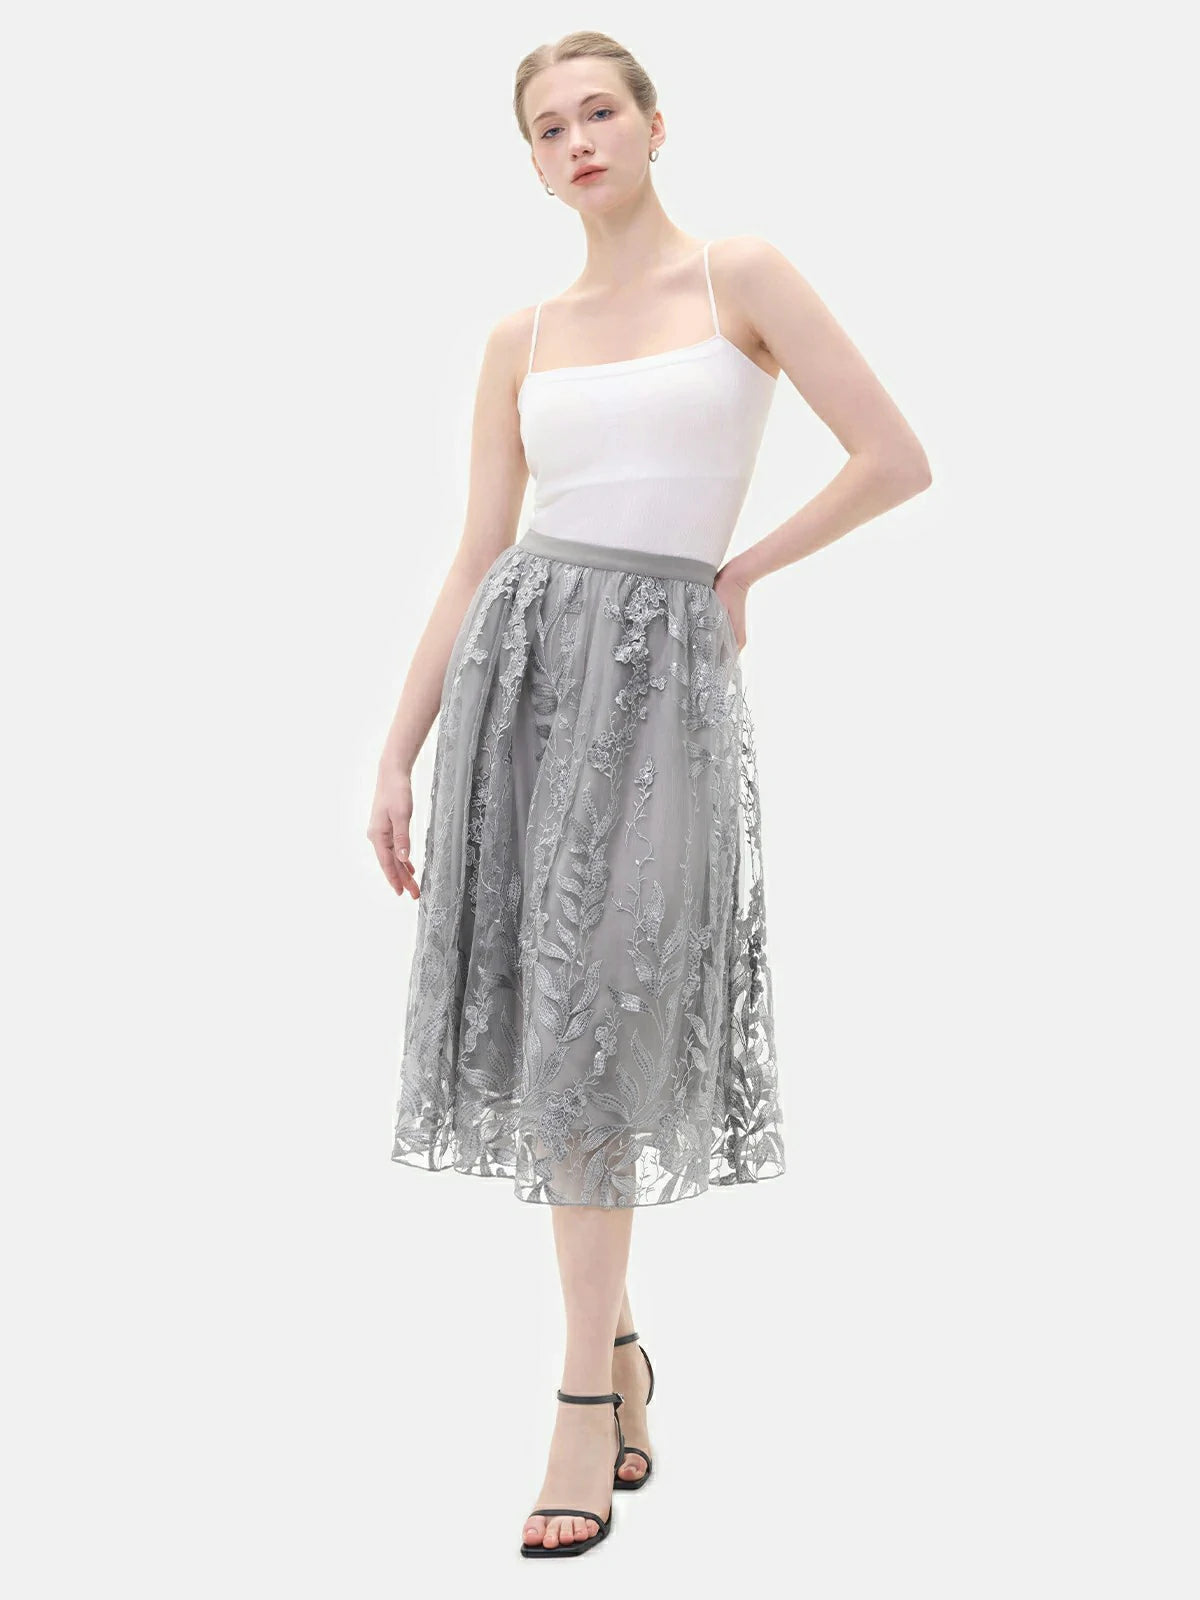 Make a statement in this elegant A-line tulle skirt, boasting an embroidered floral design, sequin embellishments, and an elastic waist